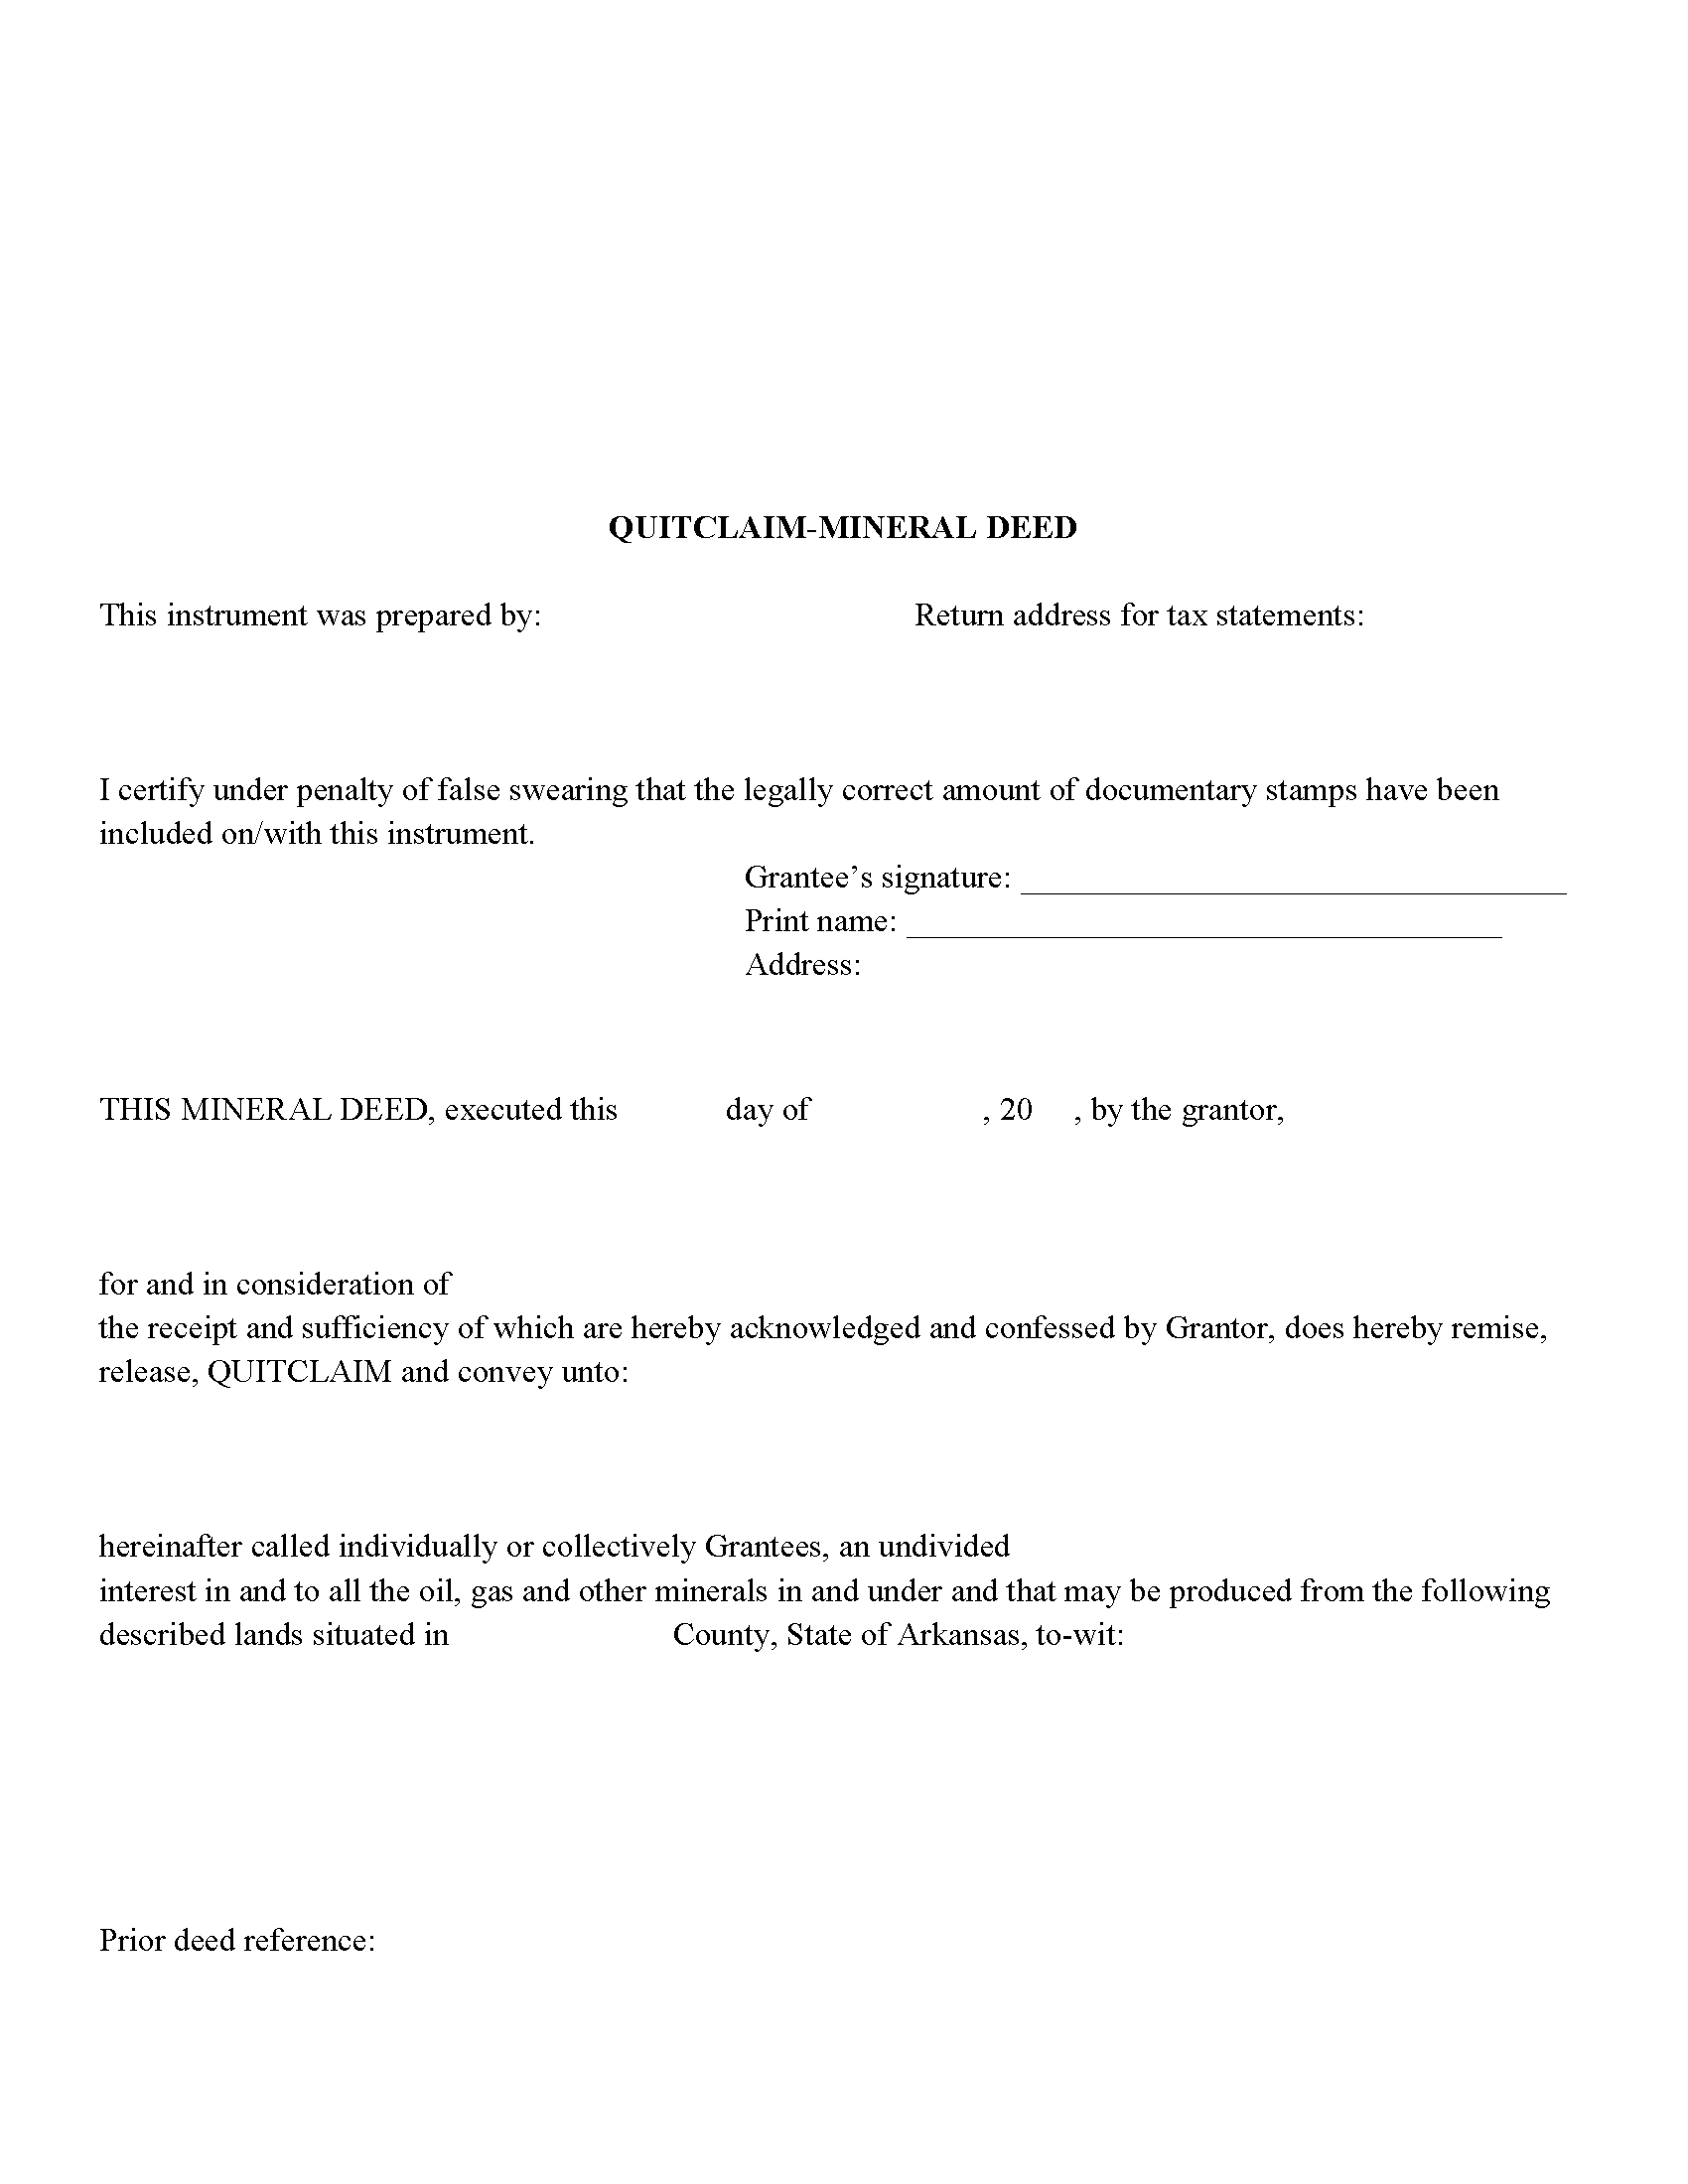 Mineral Deed with Quitclaim Covenants Form